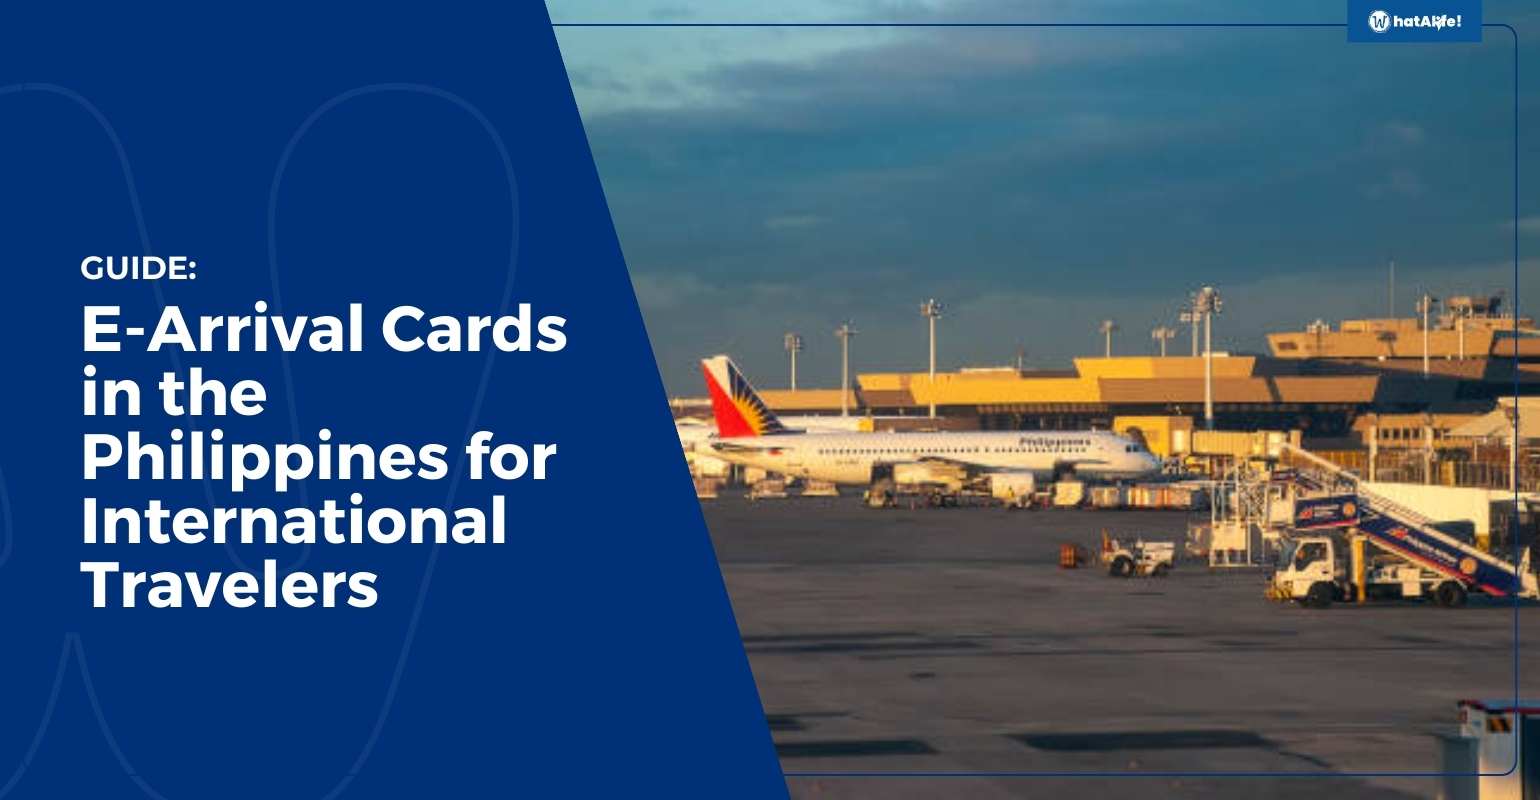 Guide: E-Arrival Cards in the Philippines for International Travelers 